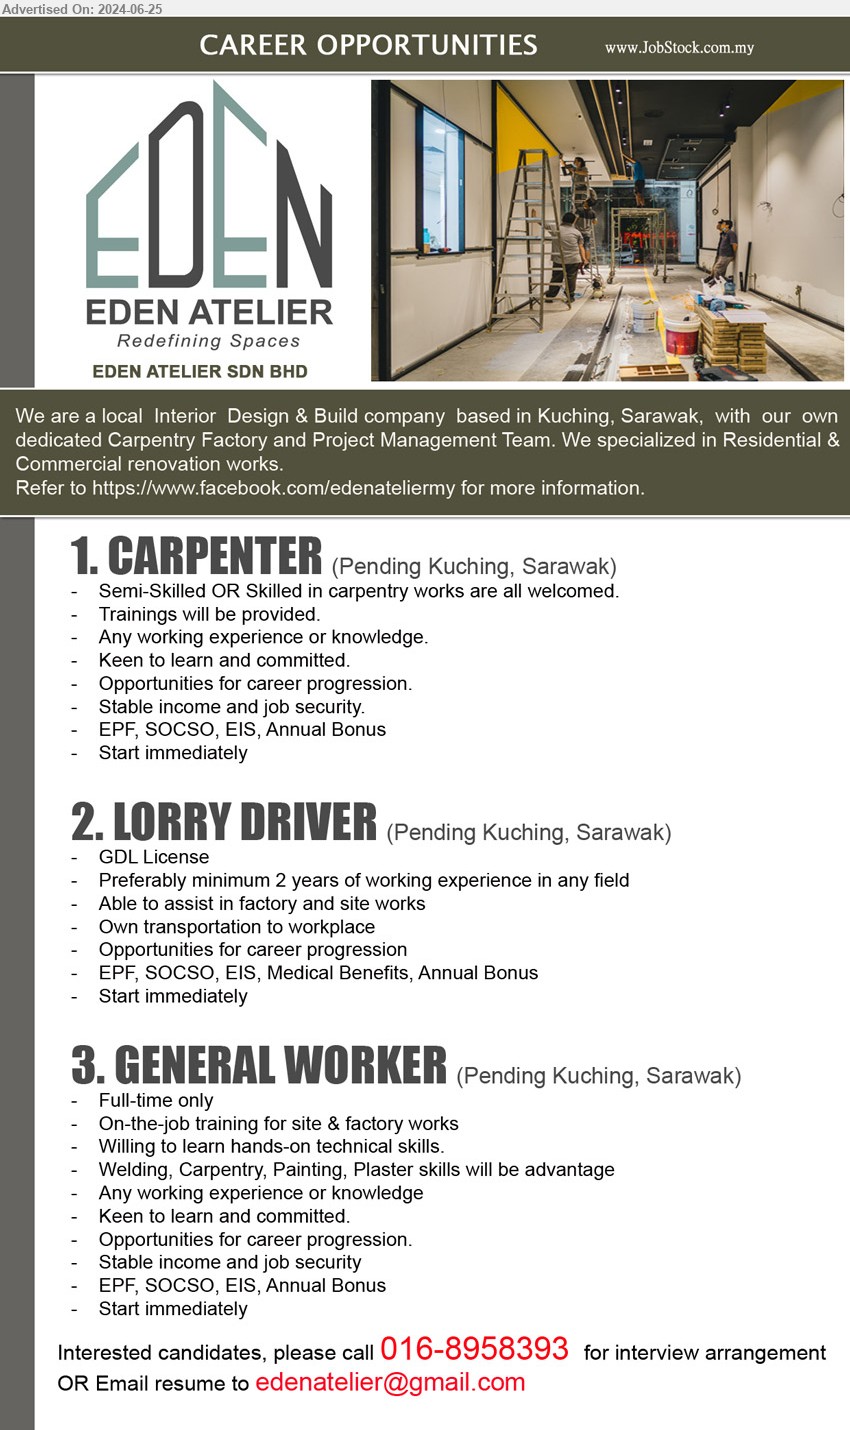 EDEN ATELIER SDN BHD - 1. CARPENTER  (Kuching), Semi-Skilled OR Skilled in carpentry works are all welcomed.,...
2. LORRY DRIVER (Kuching), GDL License, Preferably minimum 2 years of working experience in any field,...
3. GENERAL WORKER (Kuching), Welding, Carpentry, Painting, Plaster skills will be advantage,...
Call 016-8958393  / Email resume to ...